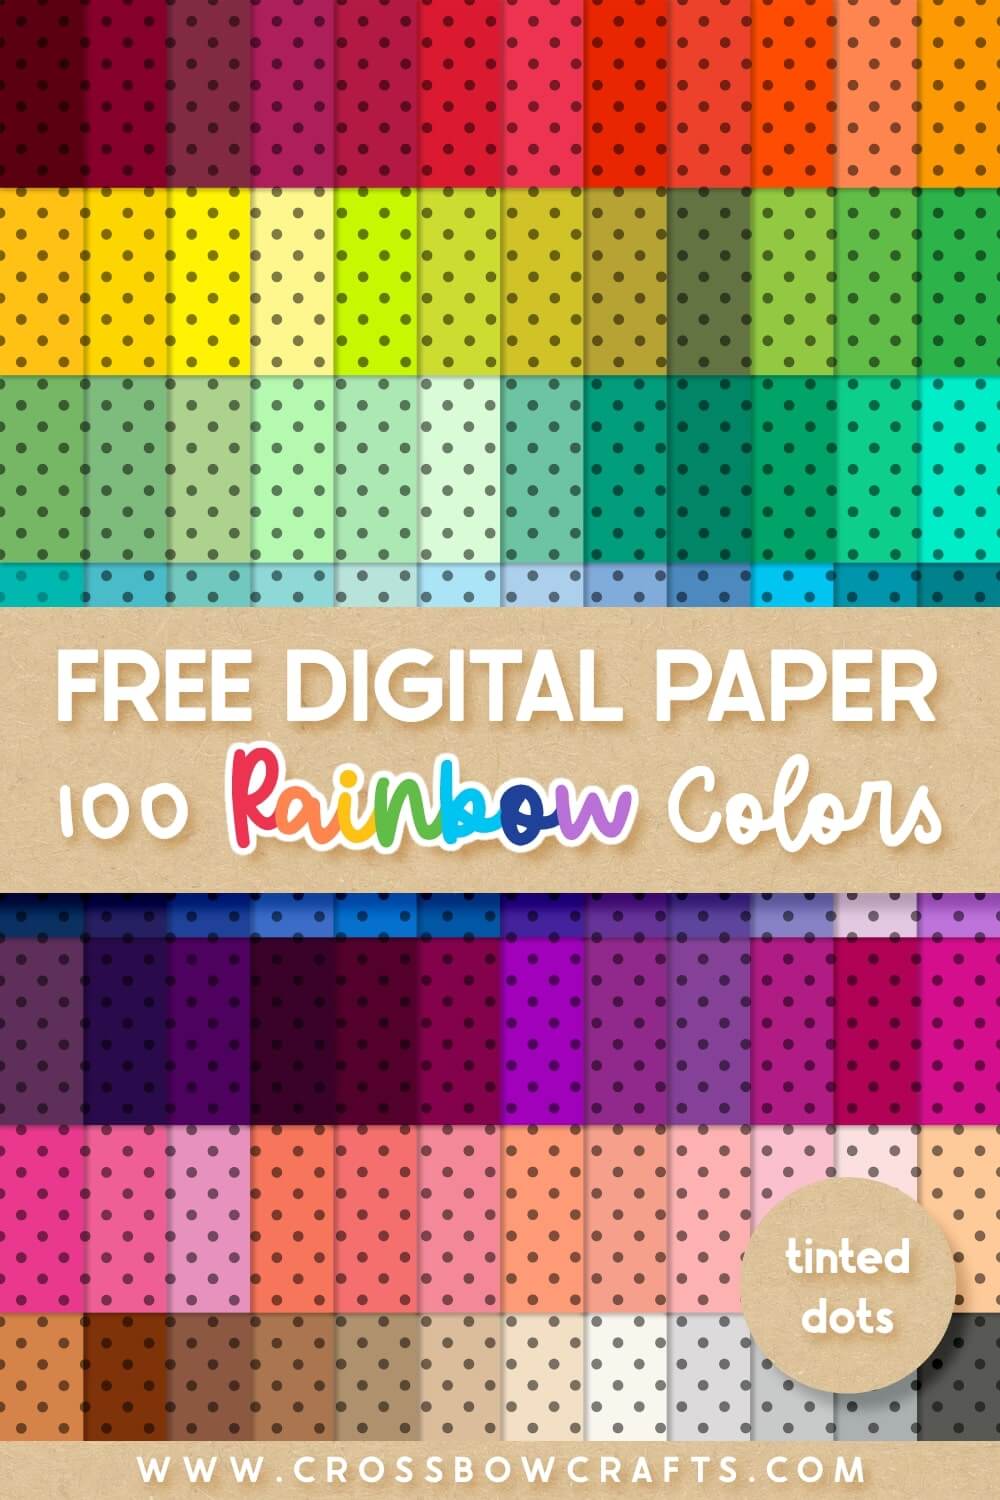 Pin graphic with text showing 100 pieces of free two-tone polka dot digital paper